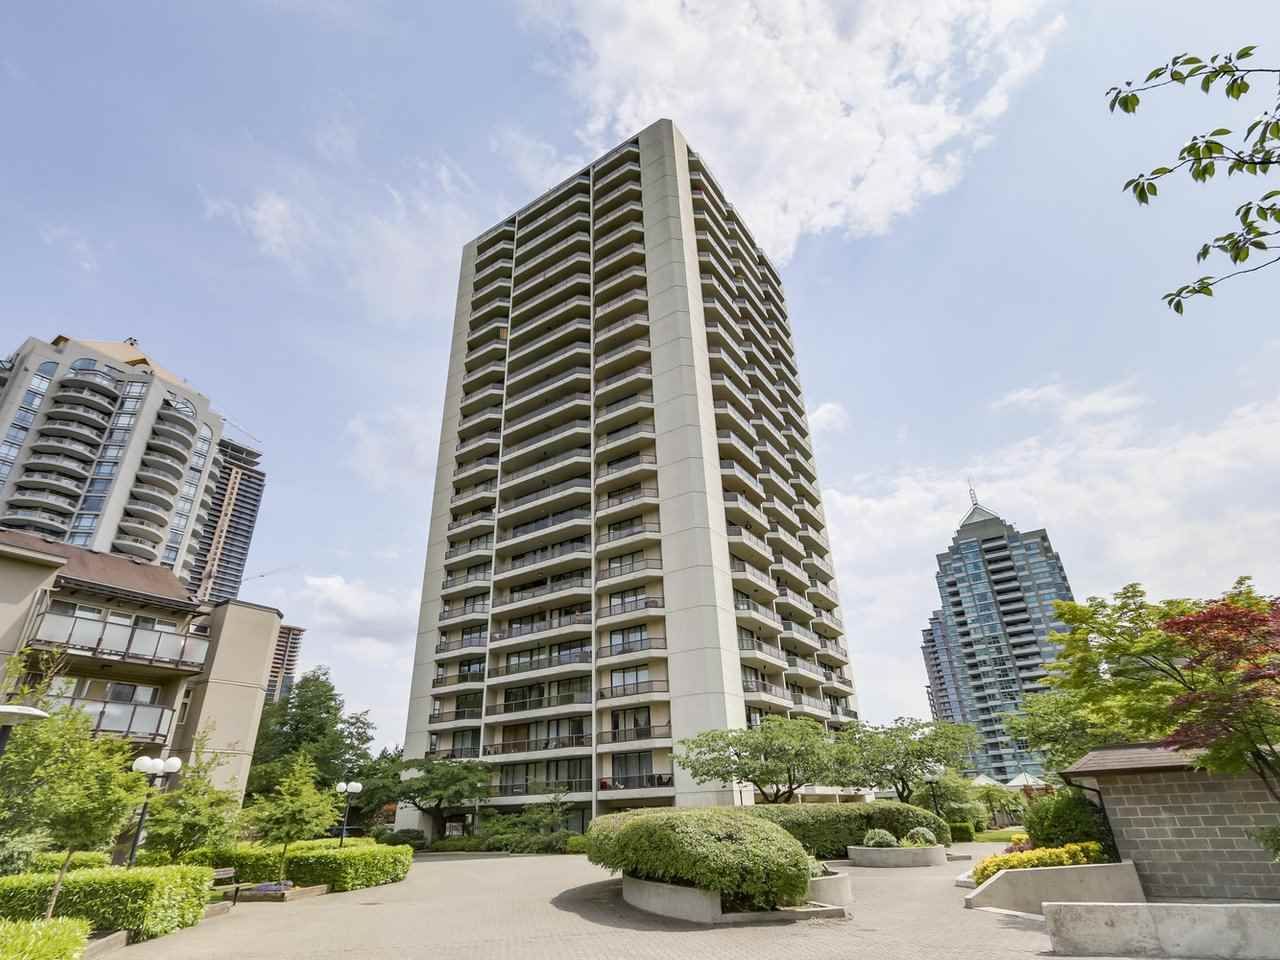 Main Photo: 1507 4353 HALIFAX STREET in : Brentwood Park Condo for sale : MLS®# R2278665